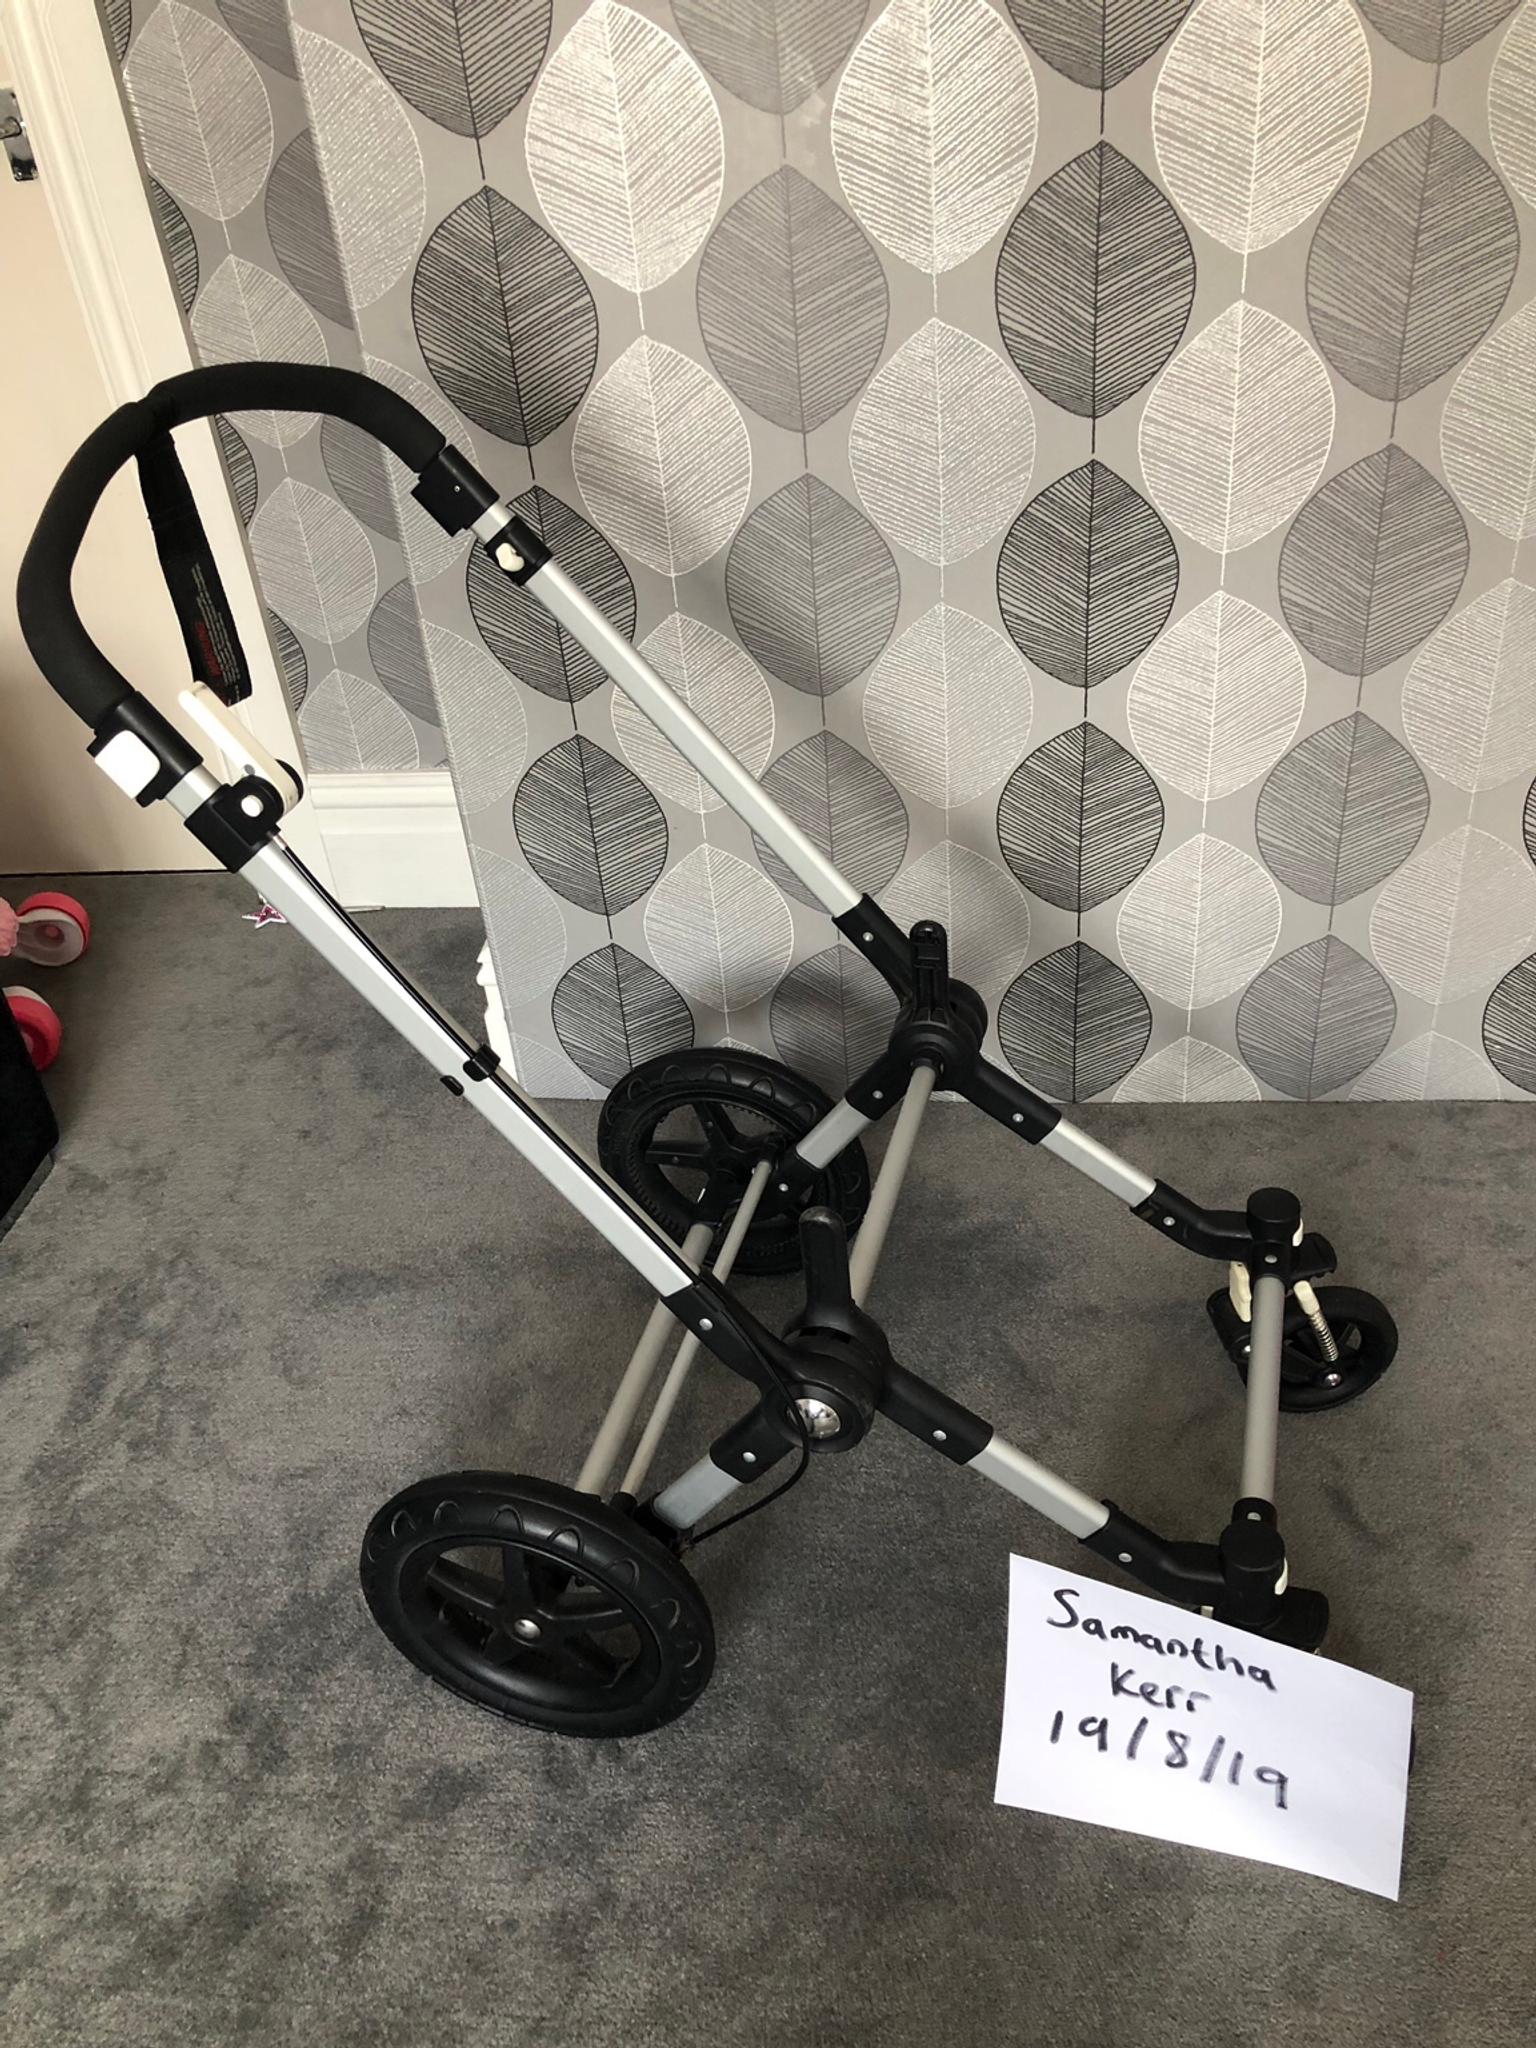 bugaboo chassis cameleon 3